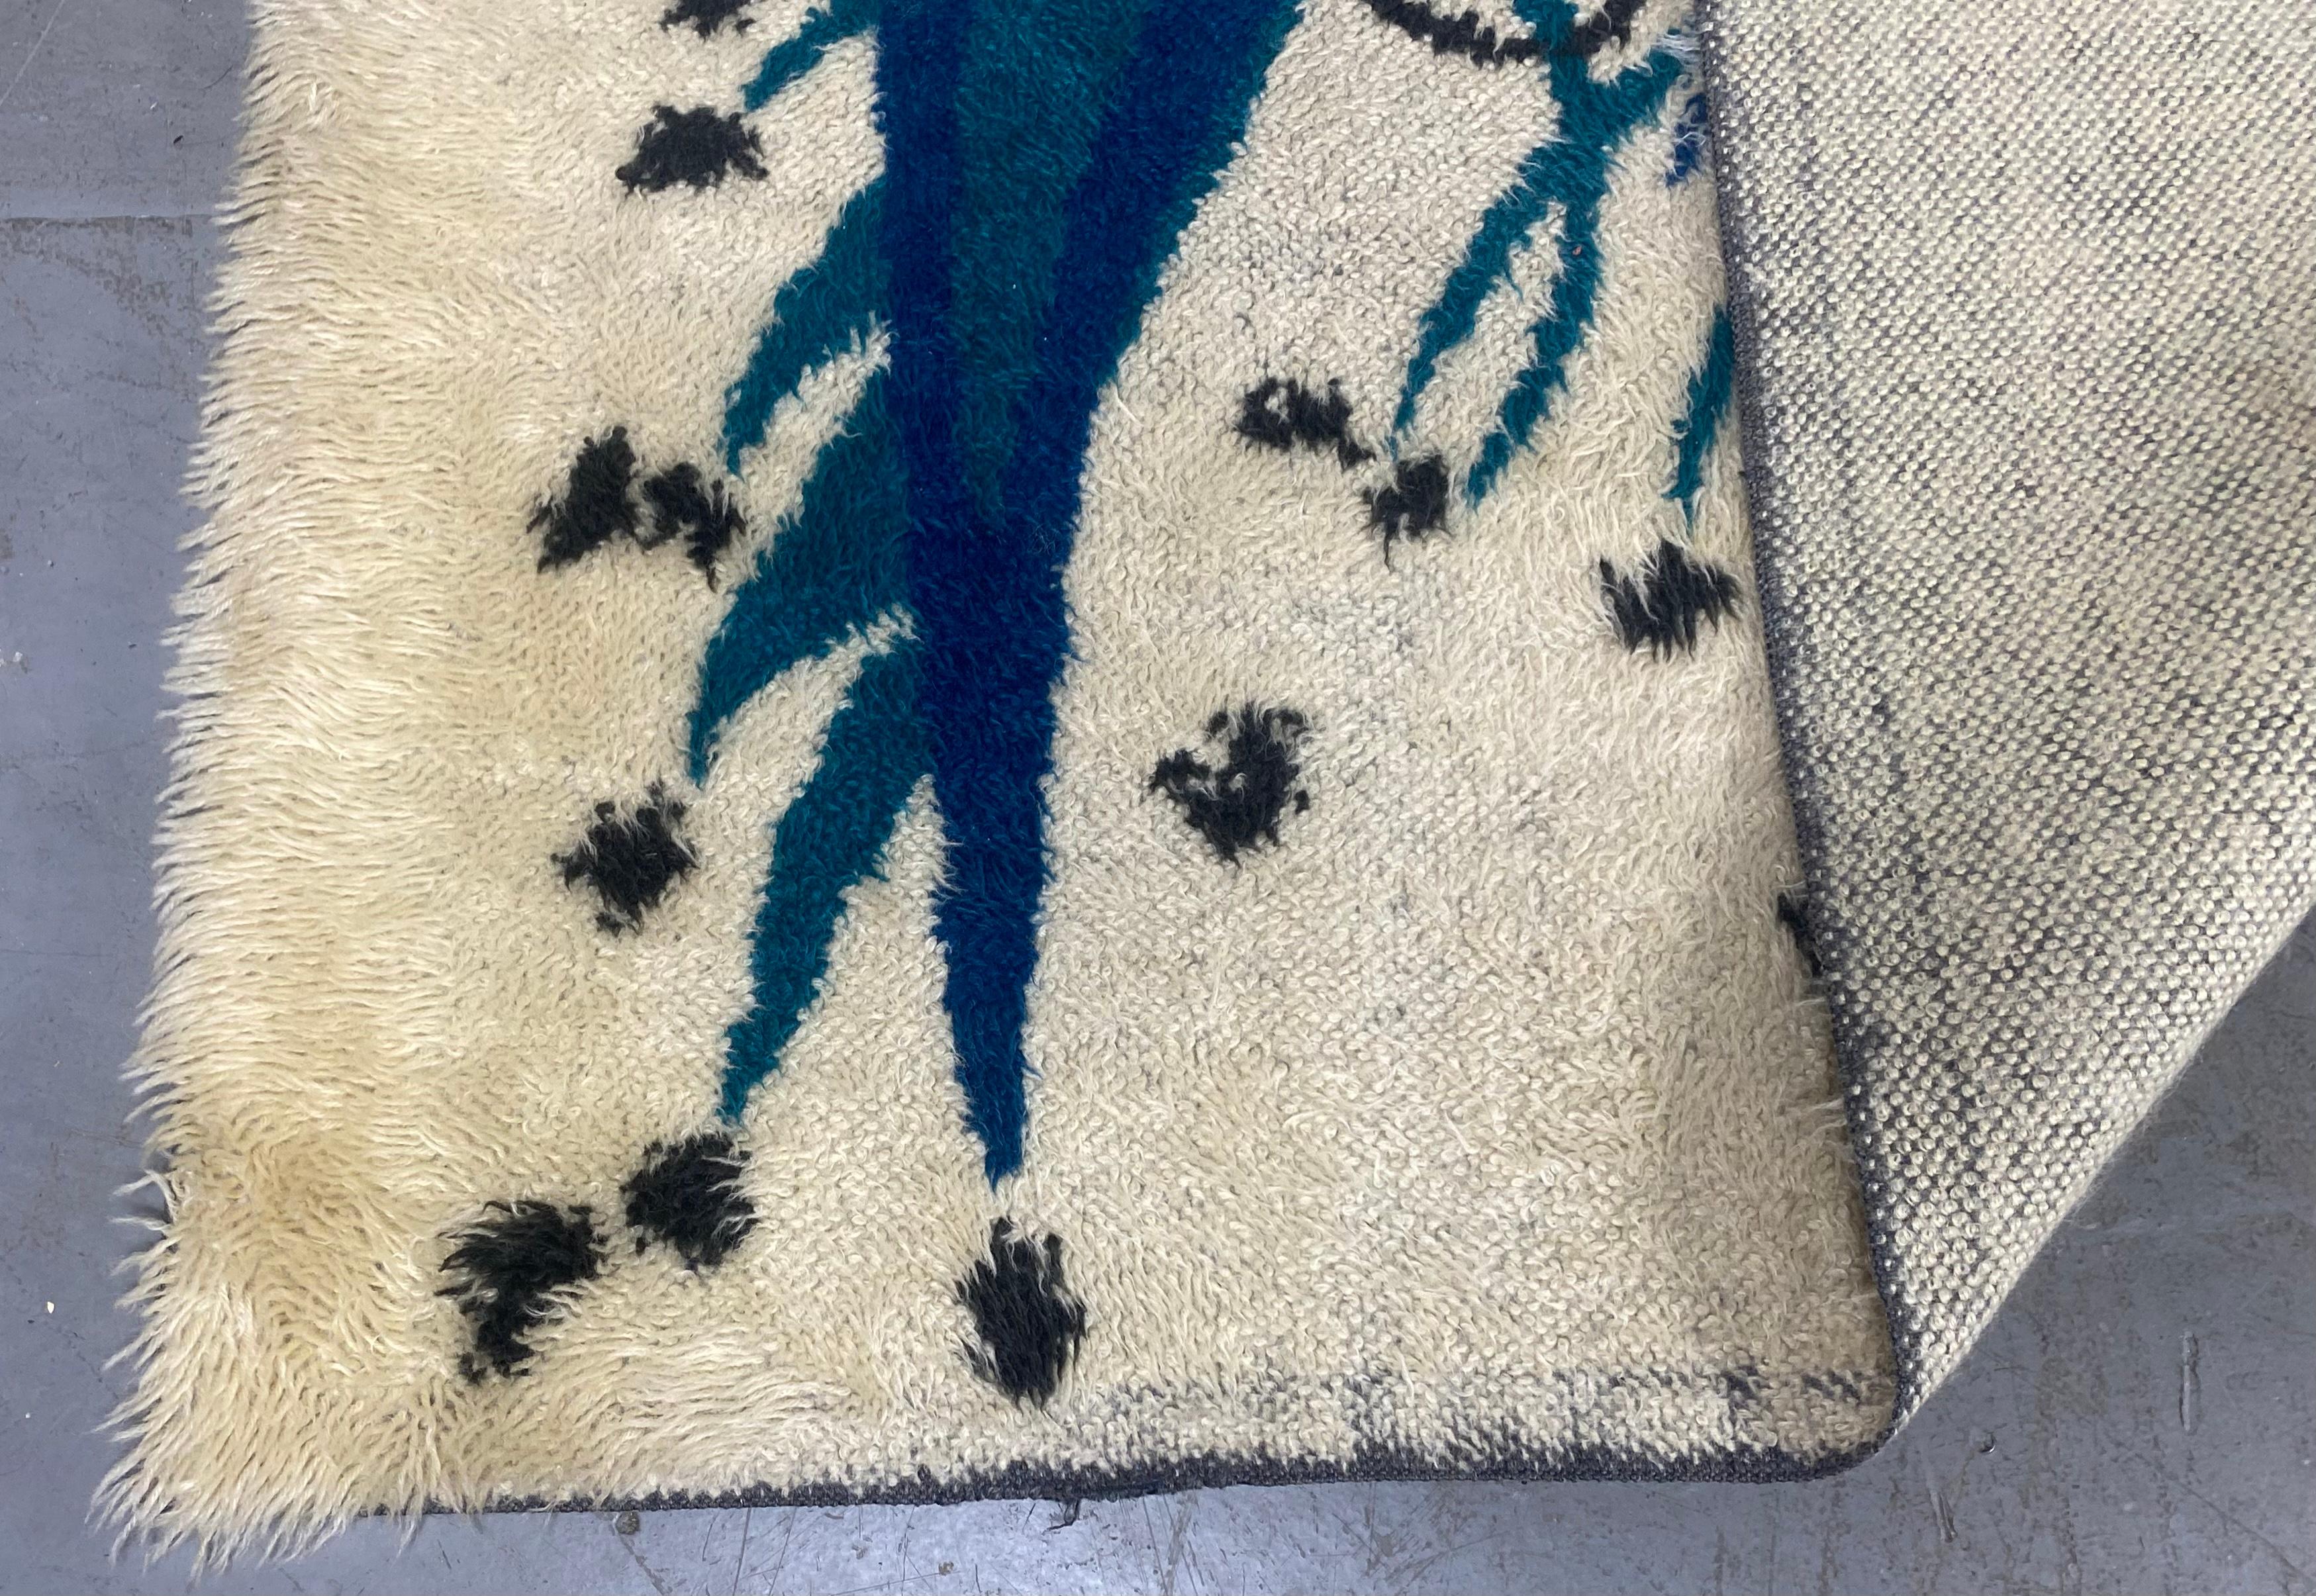 Rare opportunity to acquire an amazing modern abstract Scandinavian shag rug, attributed to Ege Rya. The carpet is a thick shag, with two tone blue abstract decorative motif, on an off white ground. in very good original condition, showing only